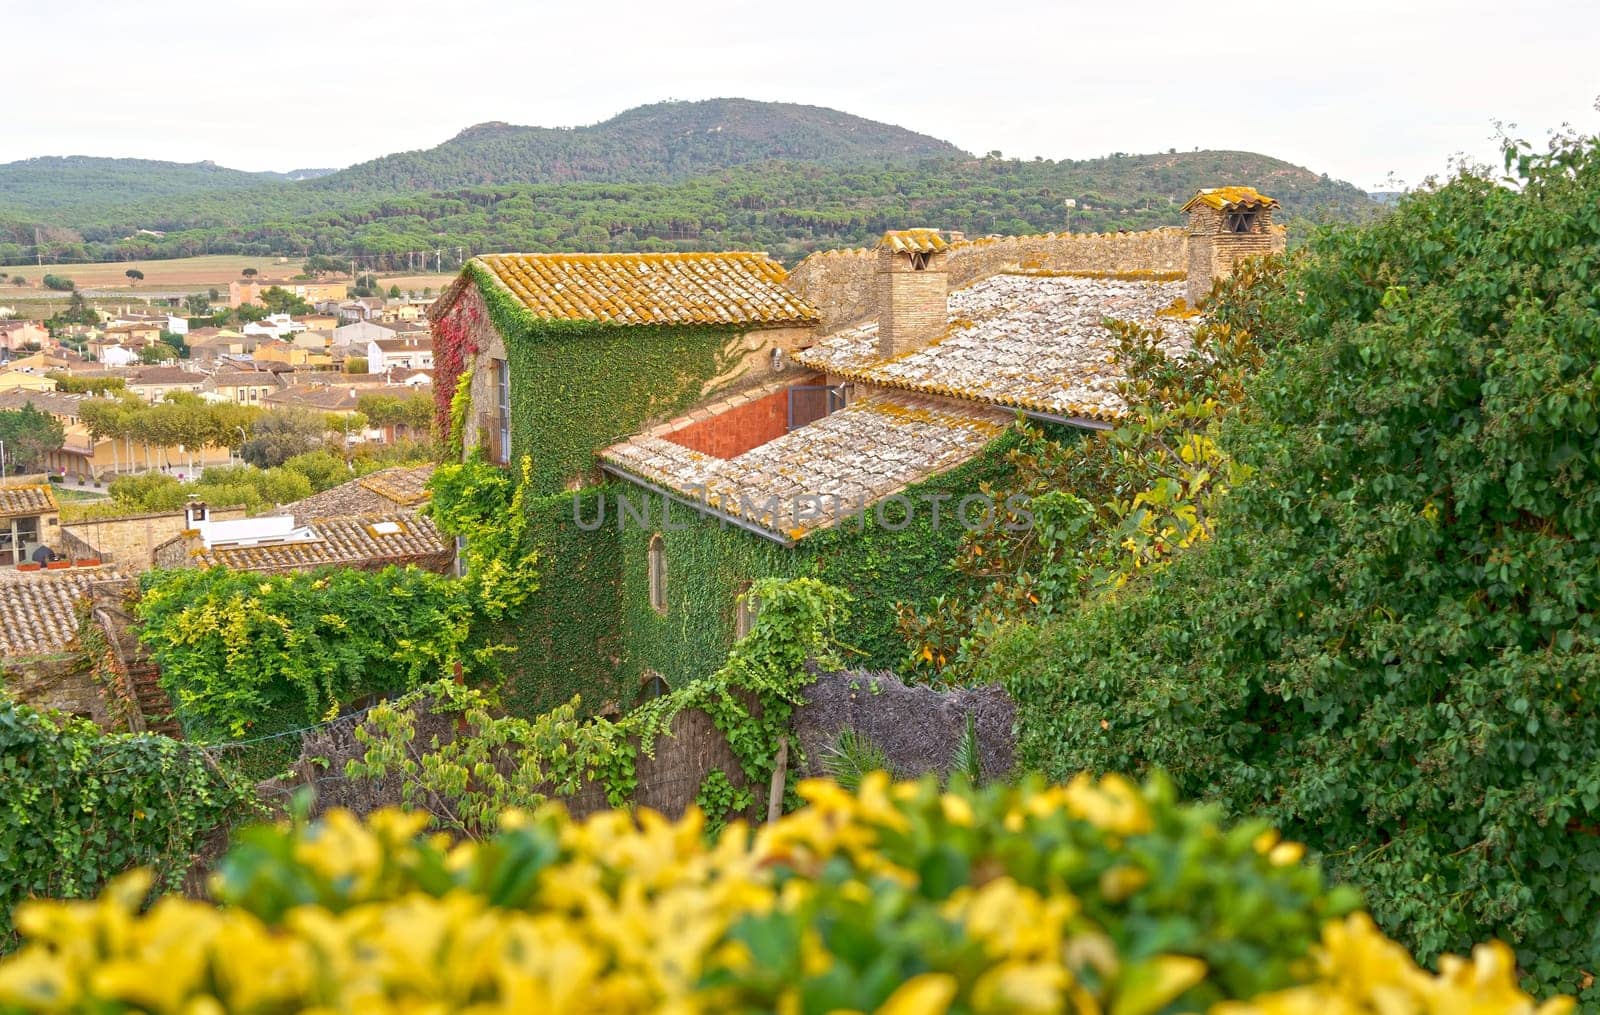 Spain. Costa Brava. Catalonia. Old village in Spain. Picturesque rooftops of the old city. Typical village with beautiful stone houses. by aprilphoto